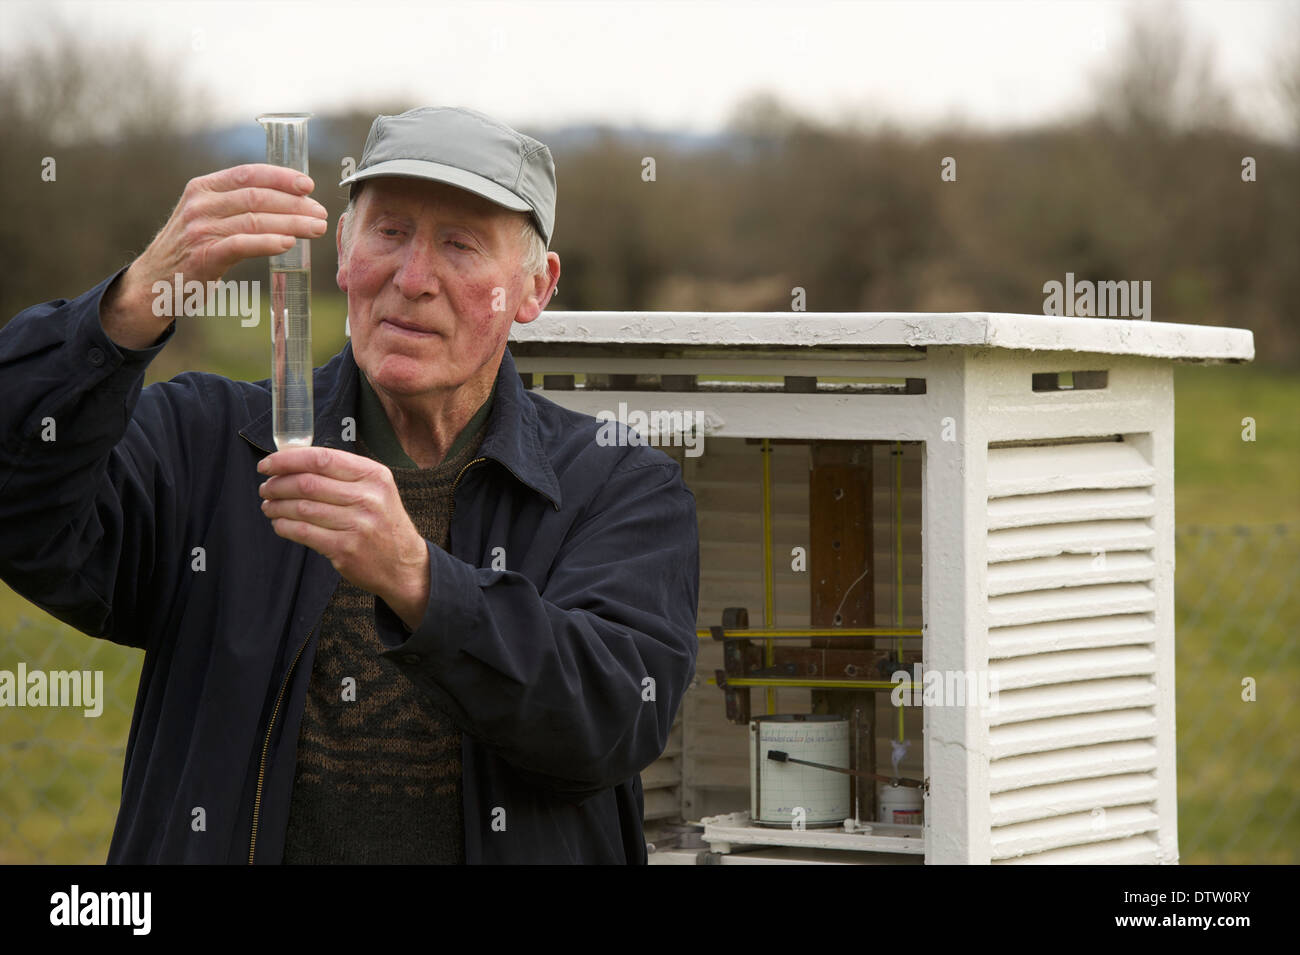 Martin Sweeney who has been a voluntary weather observer for Met Eireann for over fifty years at his home in Straide, Co. Mayo. Stock Photo